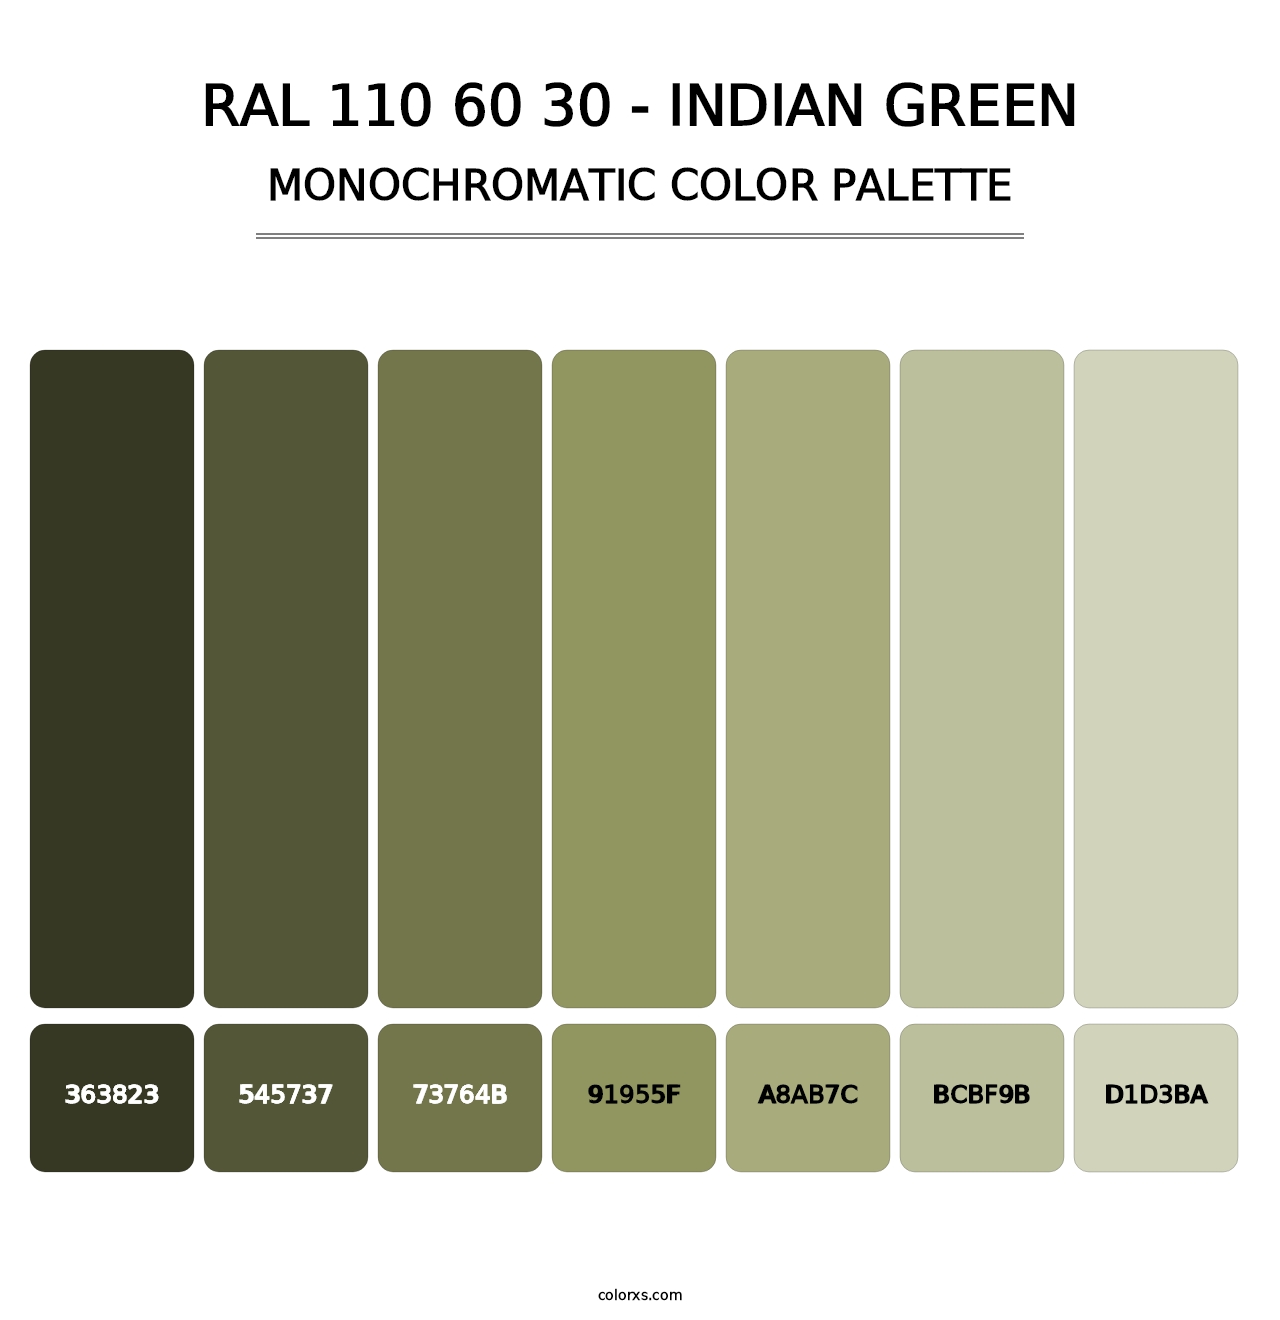 RAL 110 60 30 - Indian Green - Monochromatic Color Palette